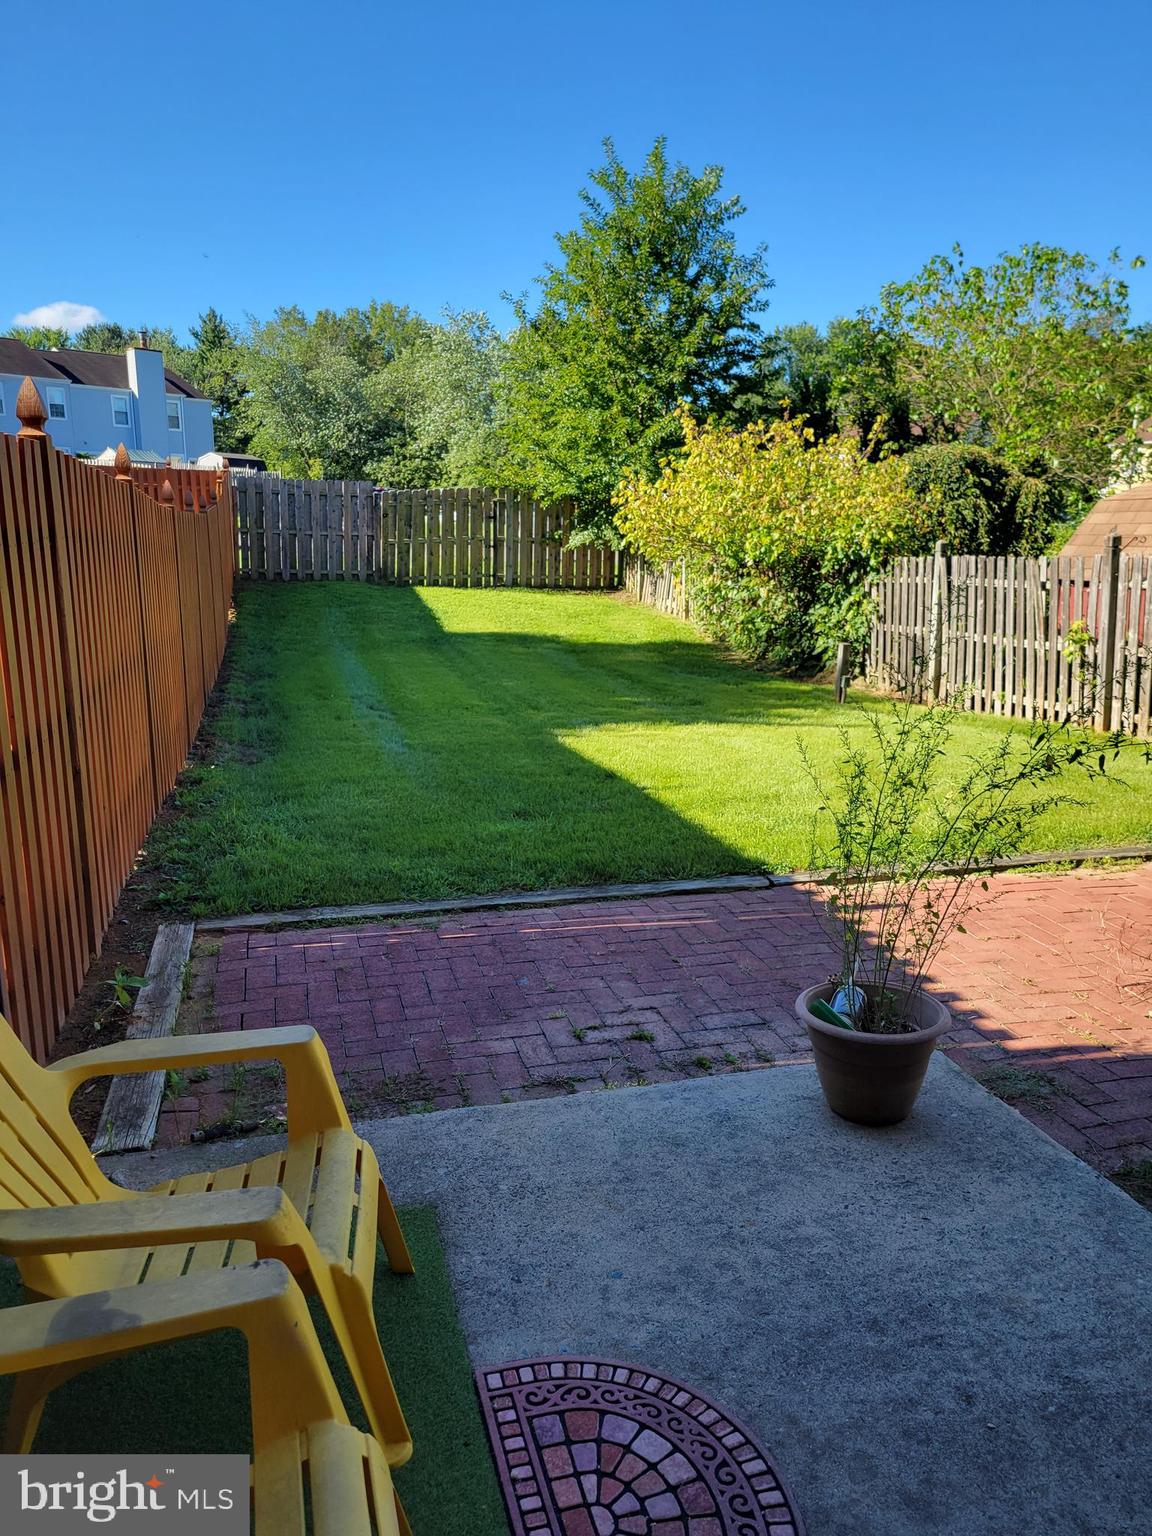 a view of a backyard with wooden fence